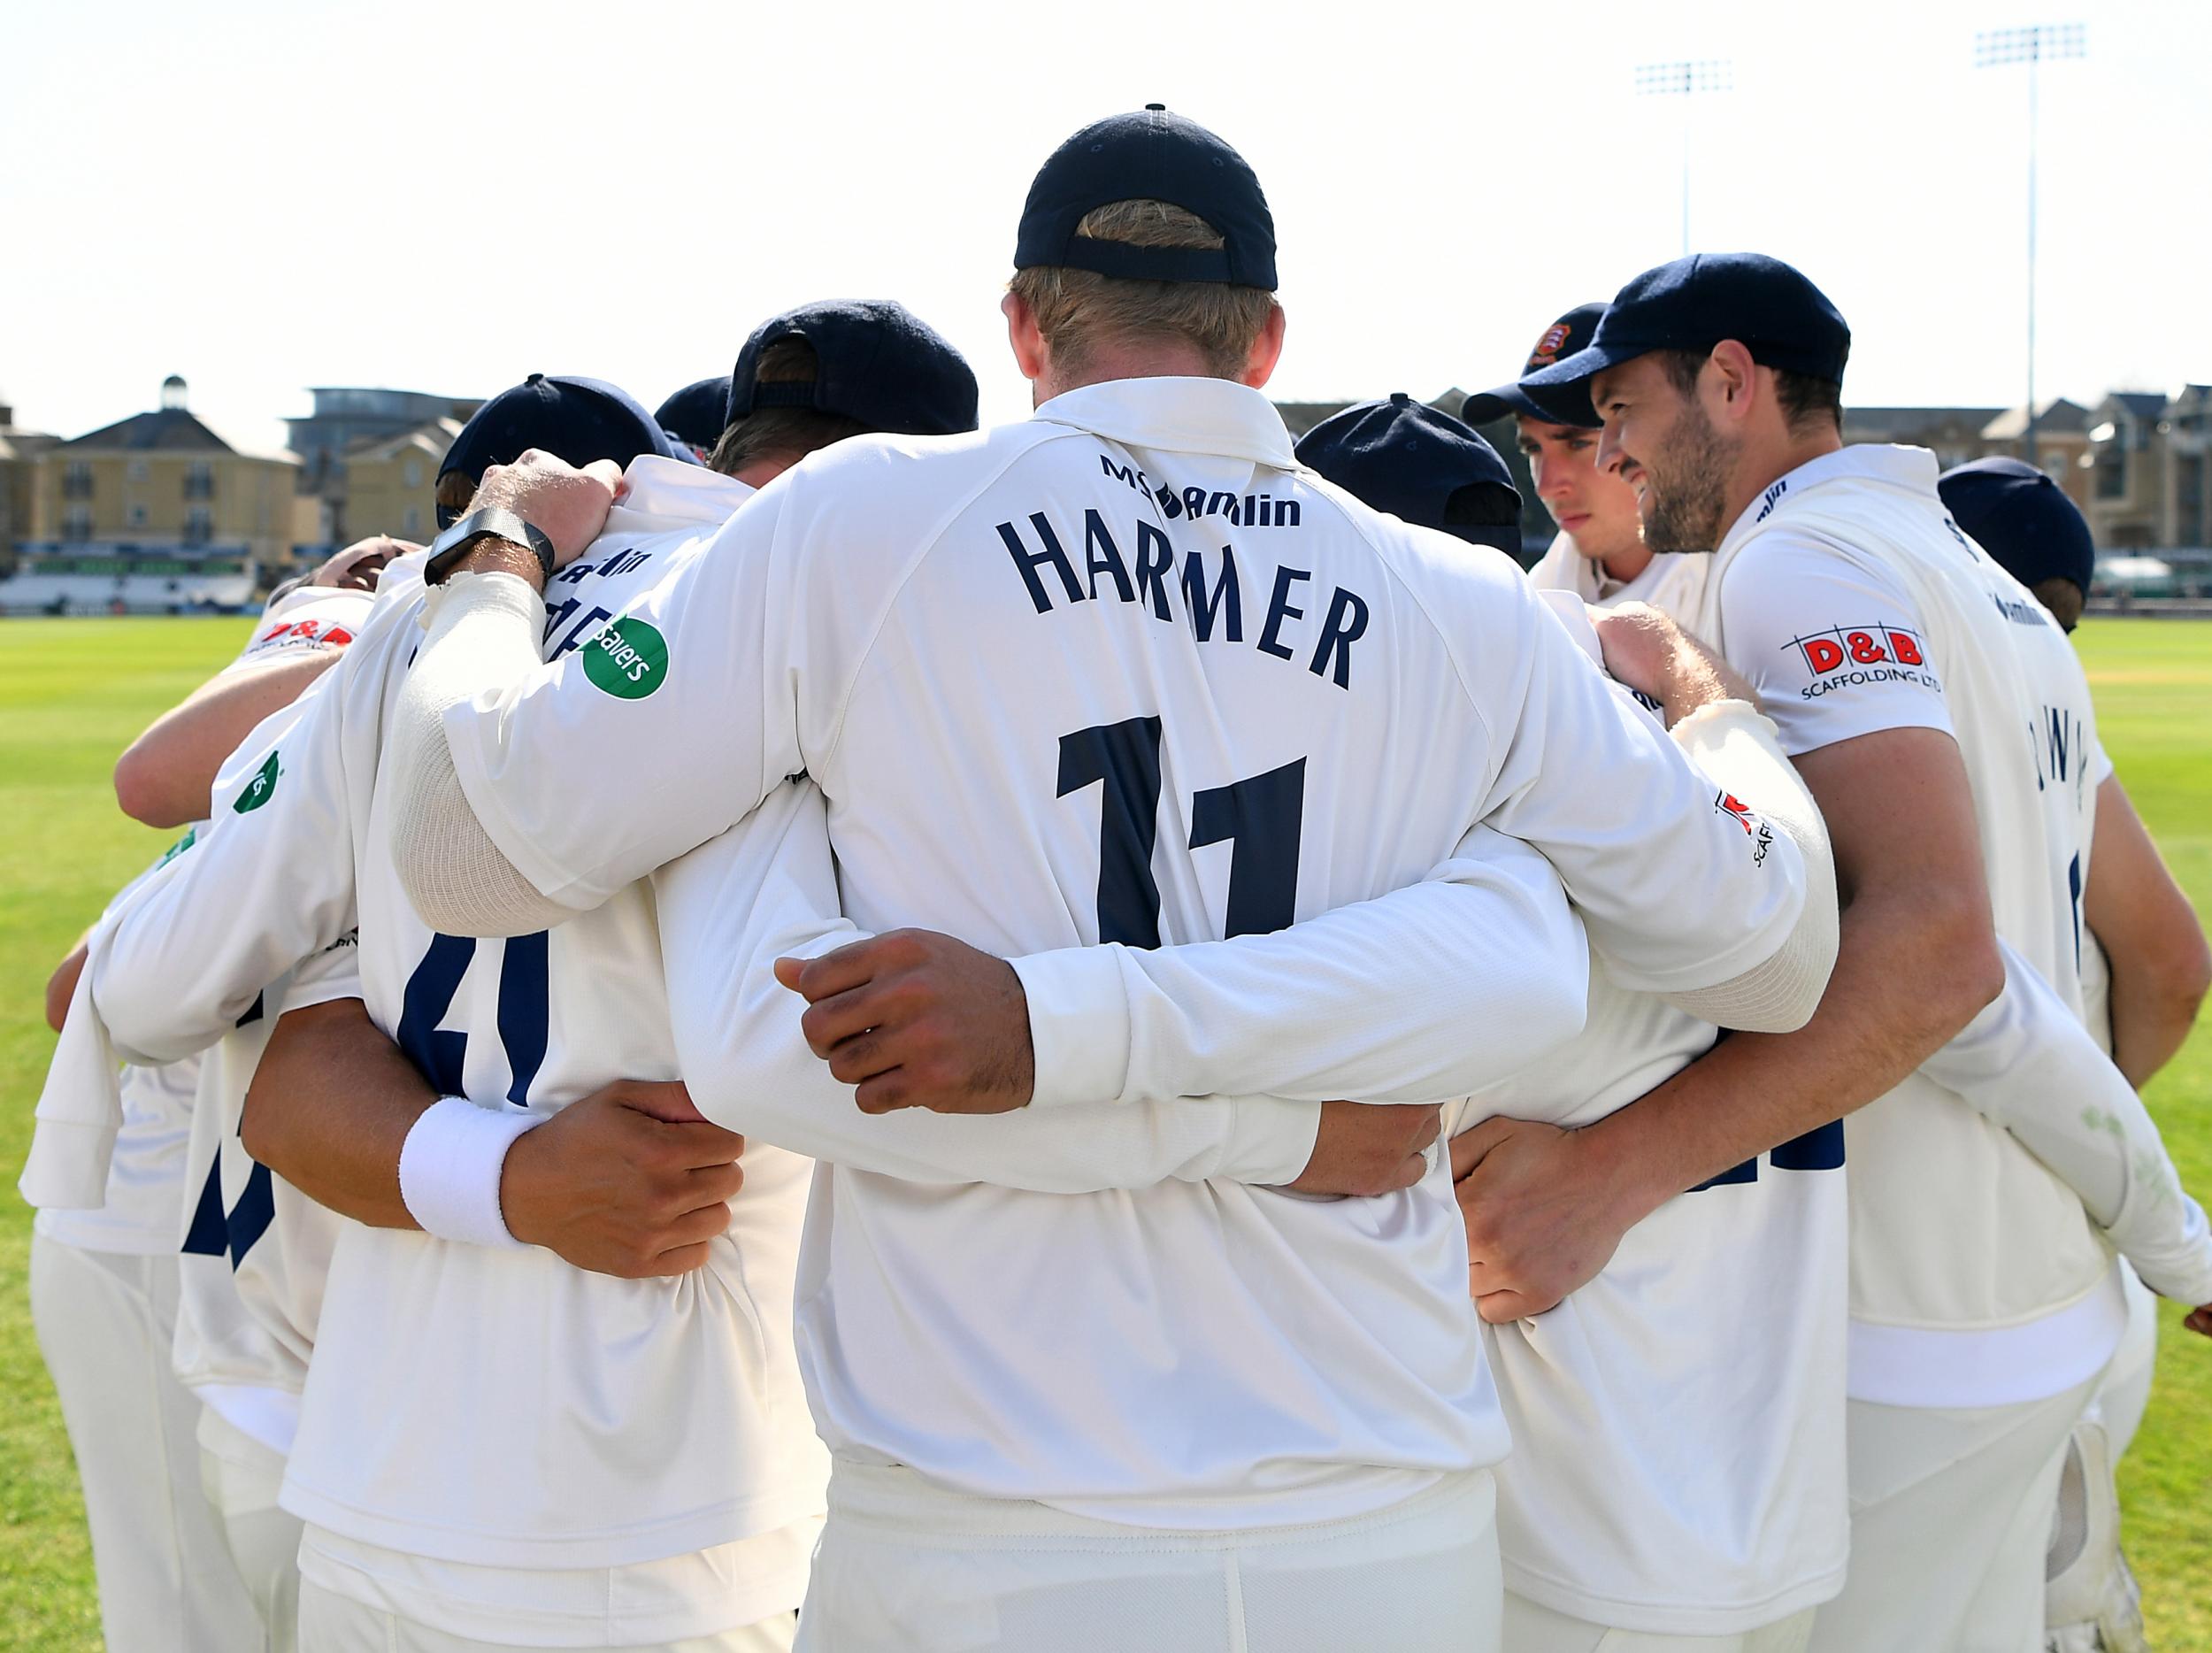 Essex have started the new County Championship season in fine form